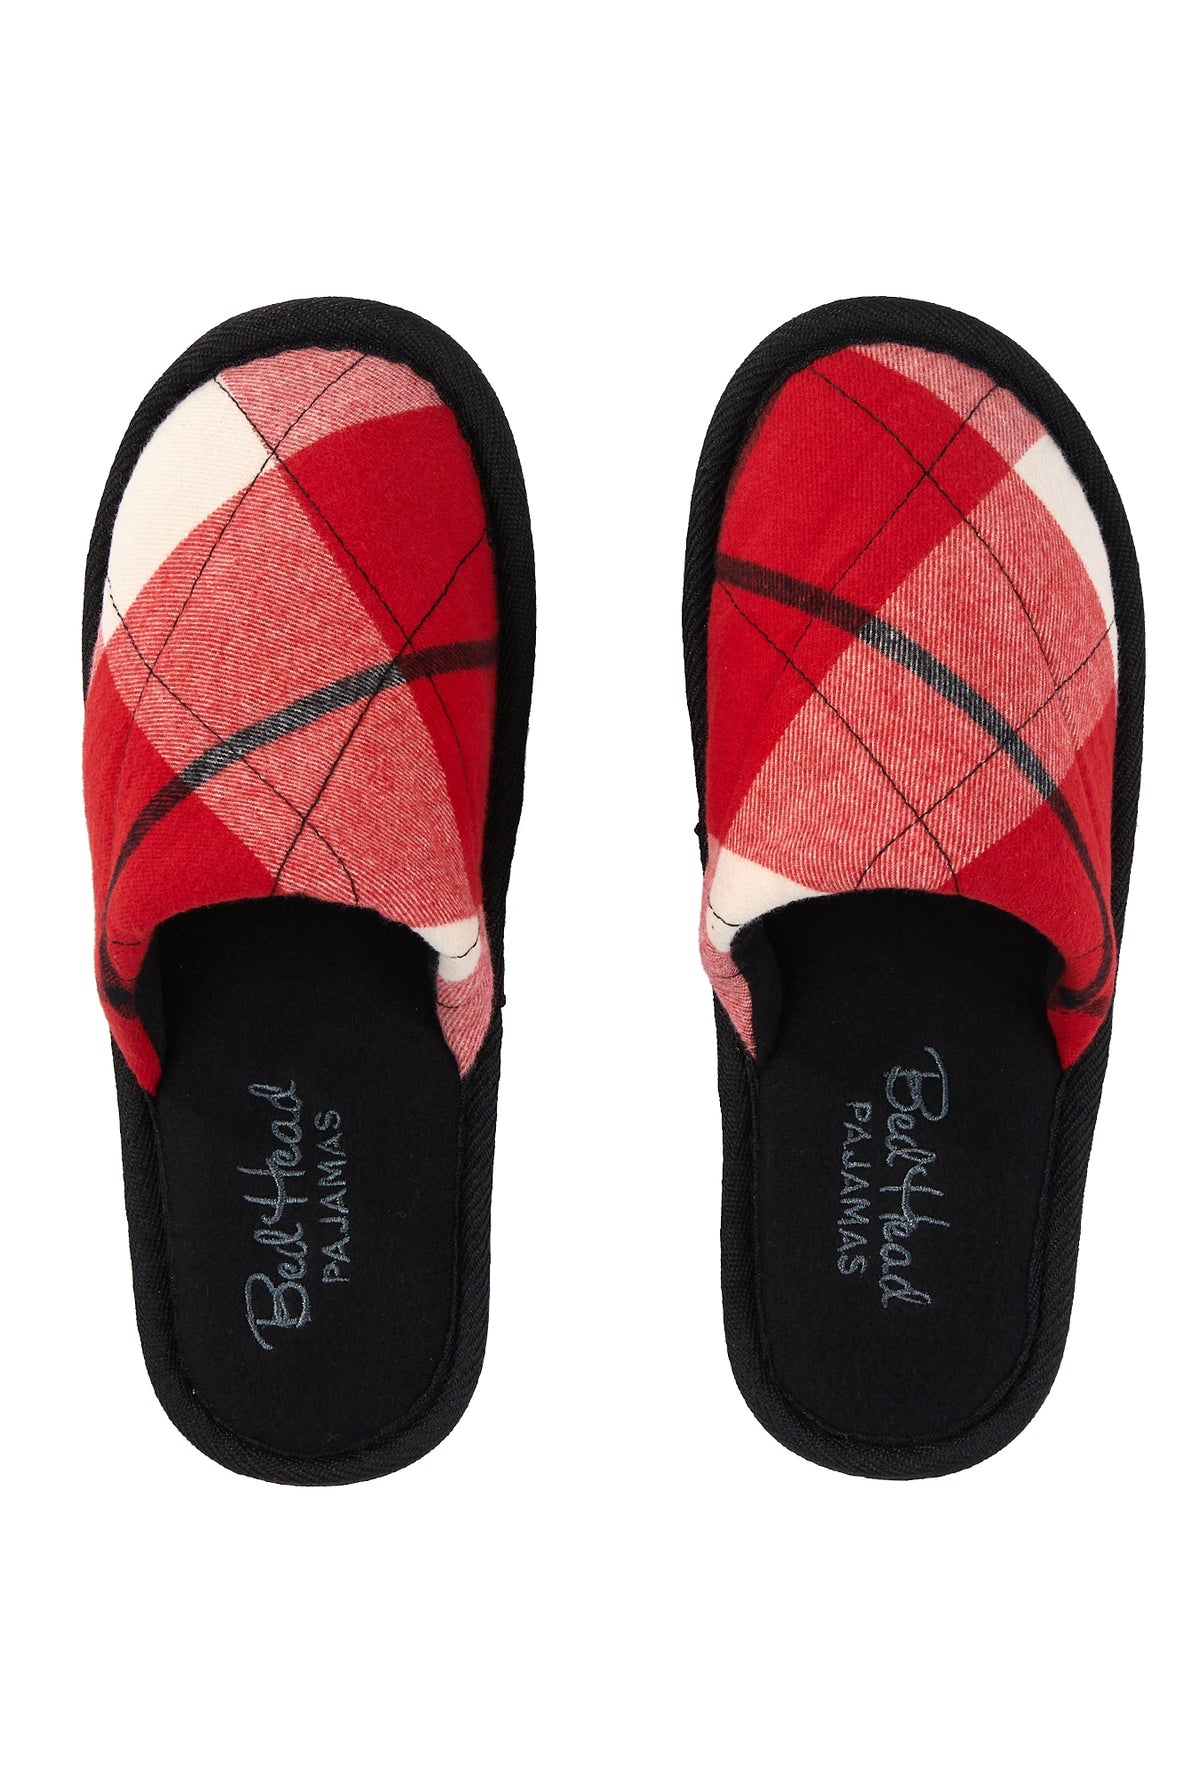 Country Plaid French Terry LinedWoven Cotton Portuguese Flannel Unisex Slippers